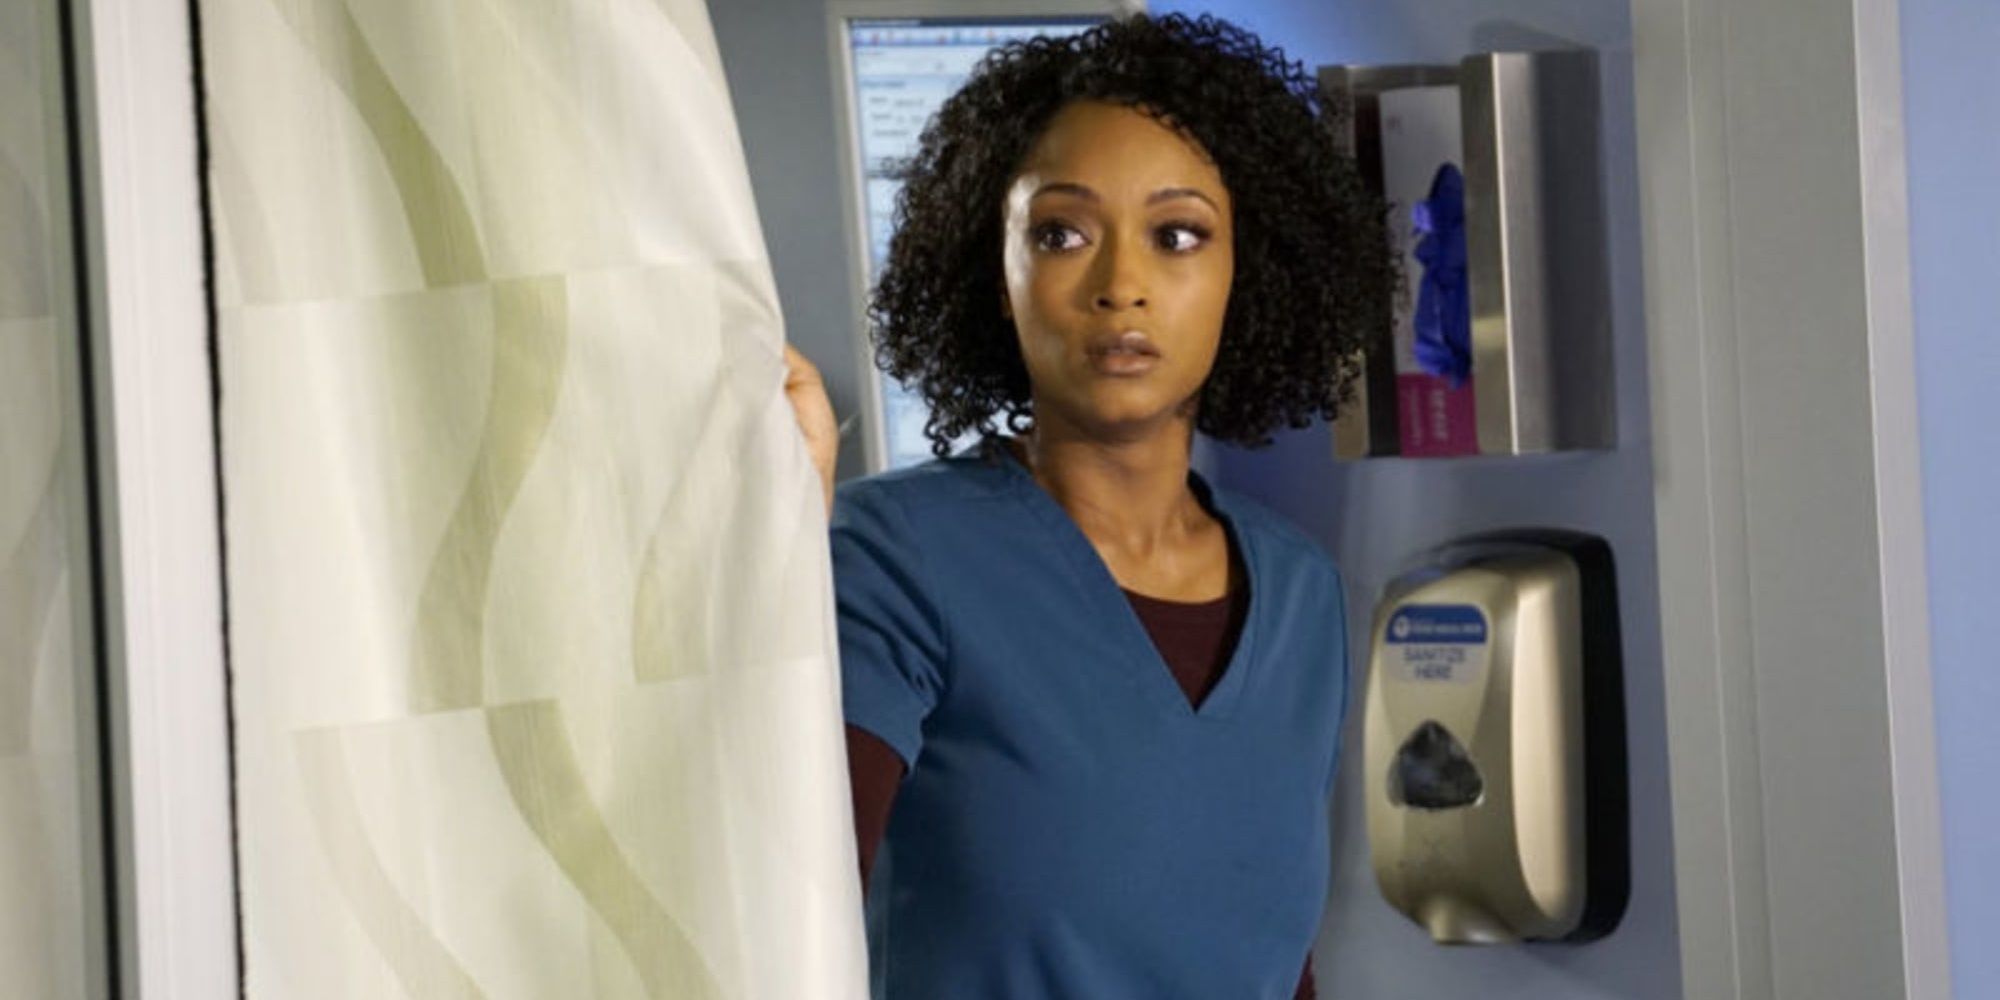 April closes a privacy curtain in Chicago Med episode 